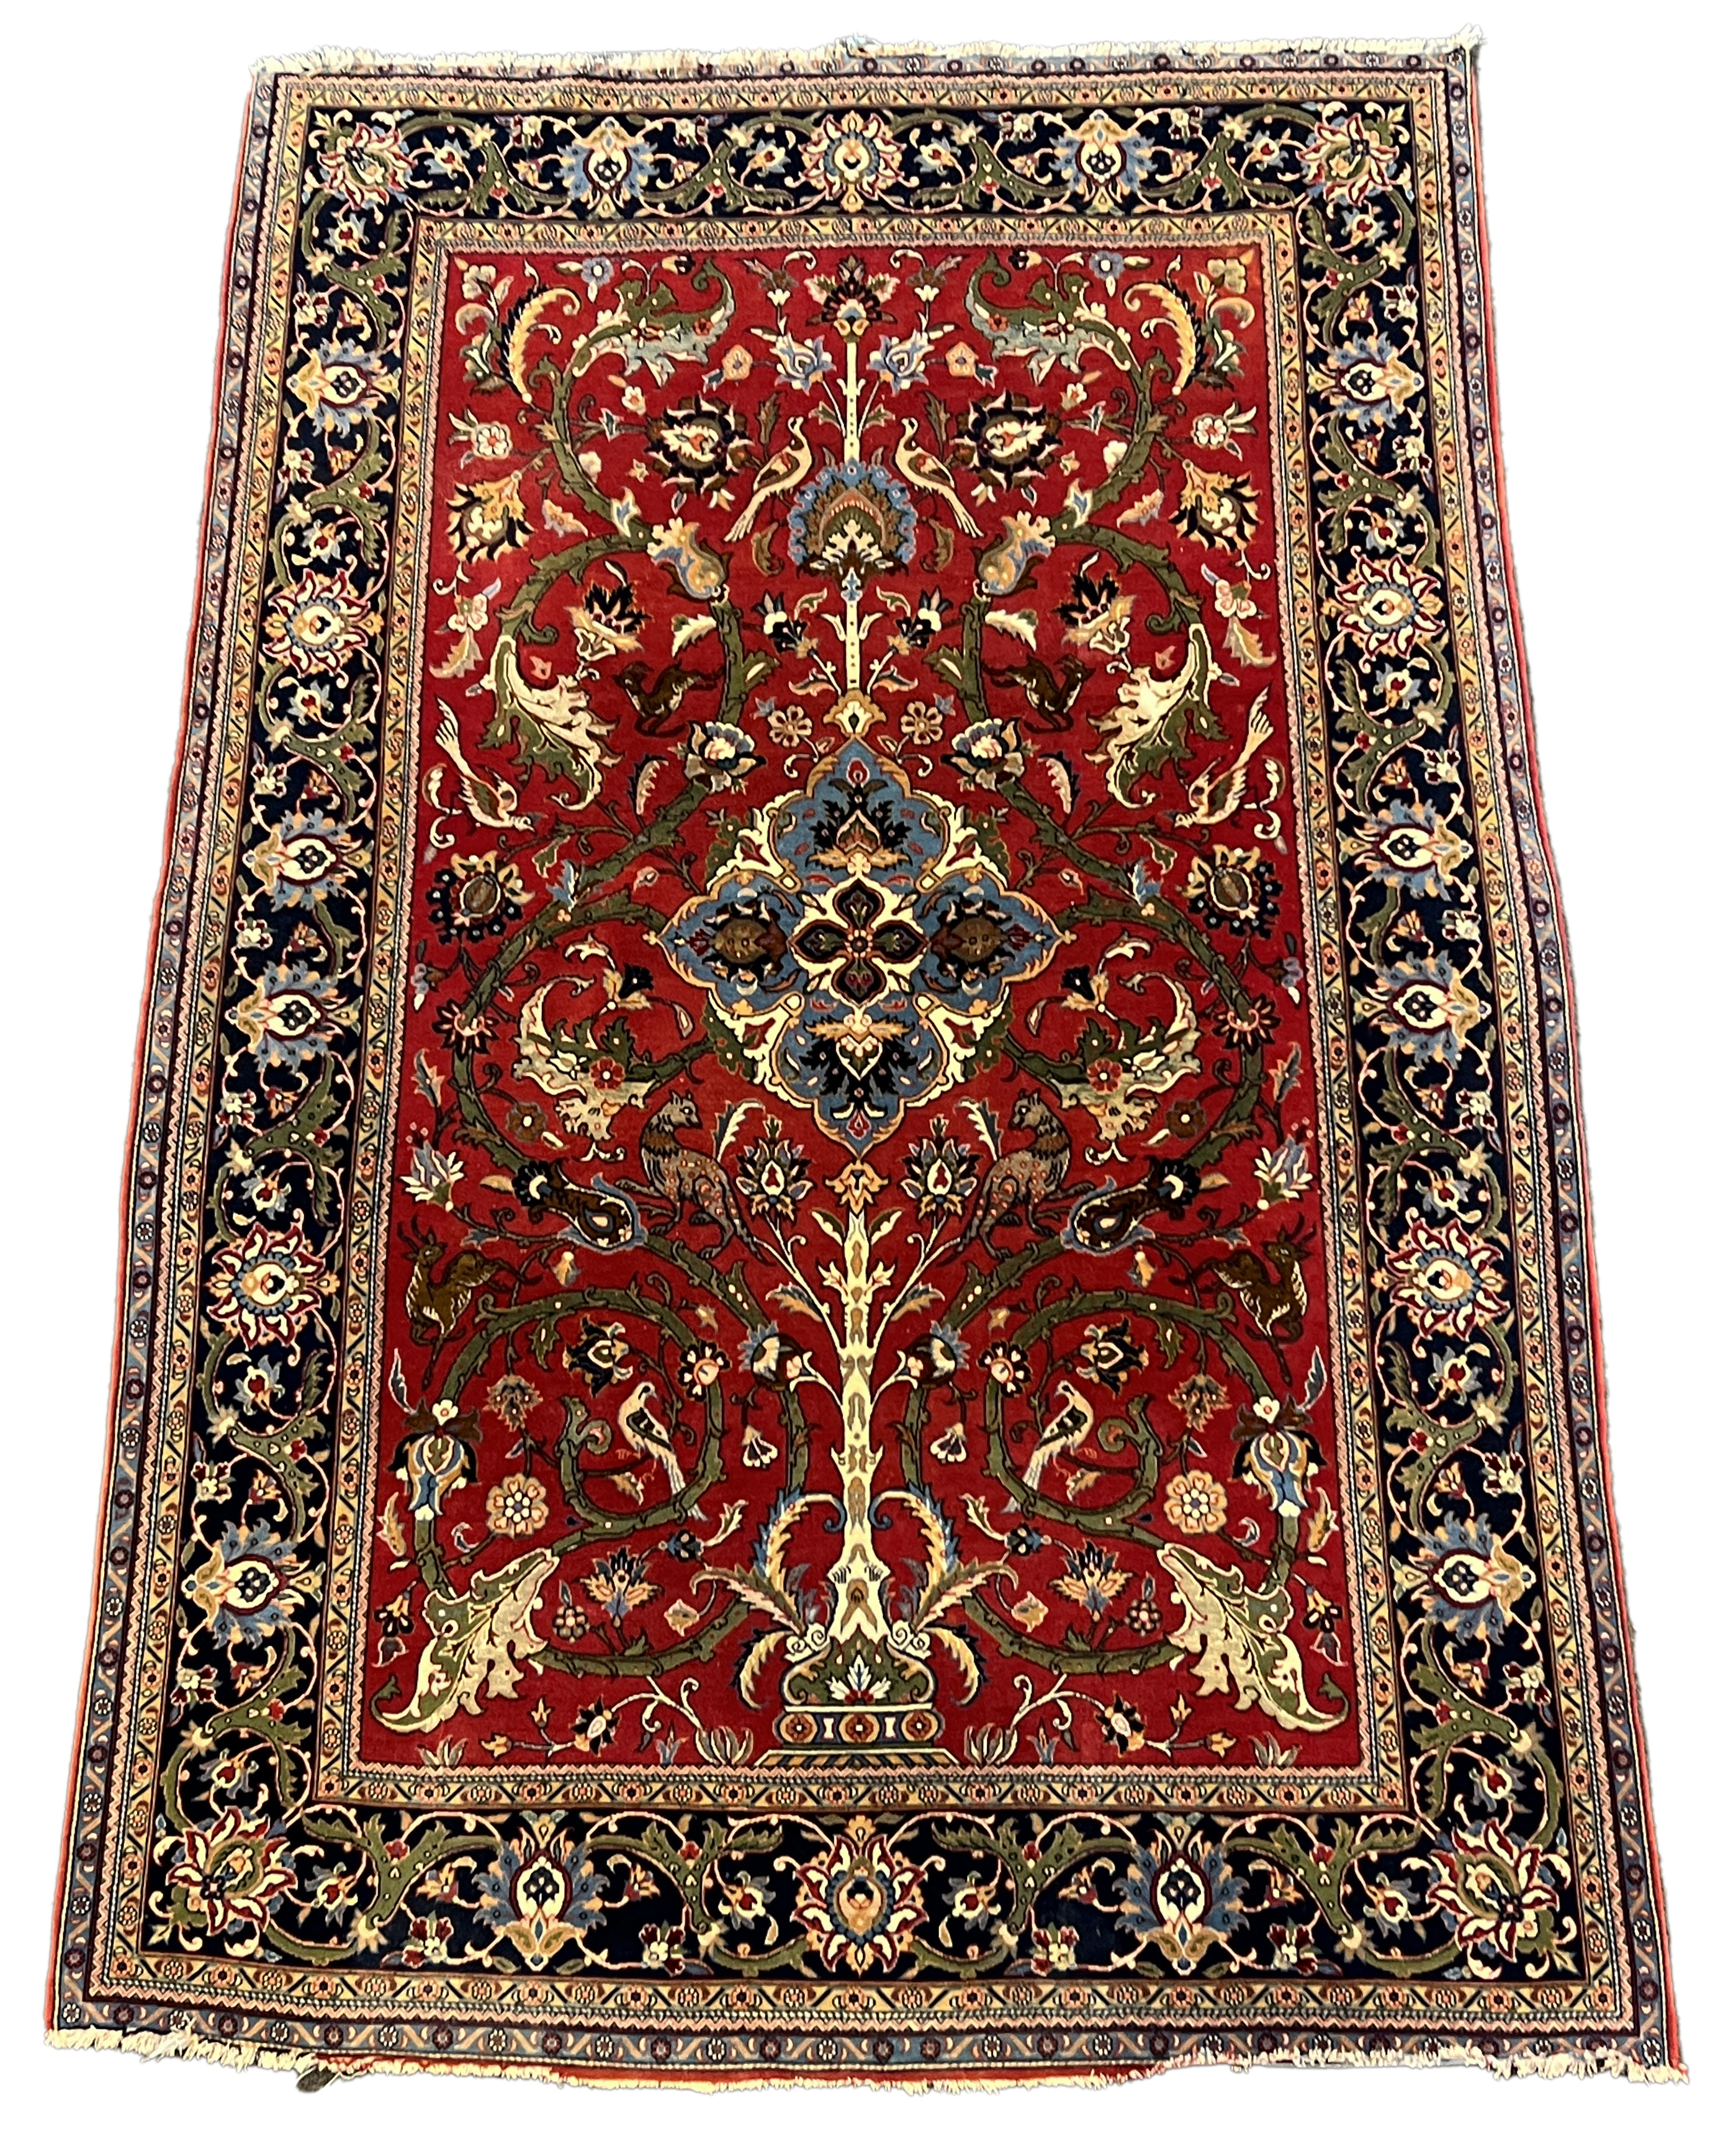 A Kashan red ground rug, woven with scrolling foliage and birds within a dark border, 216 x 138cm. Condition - good